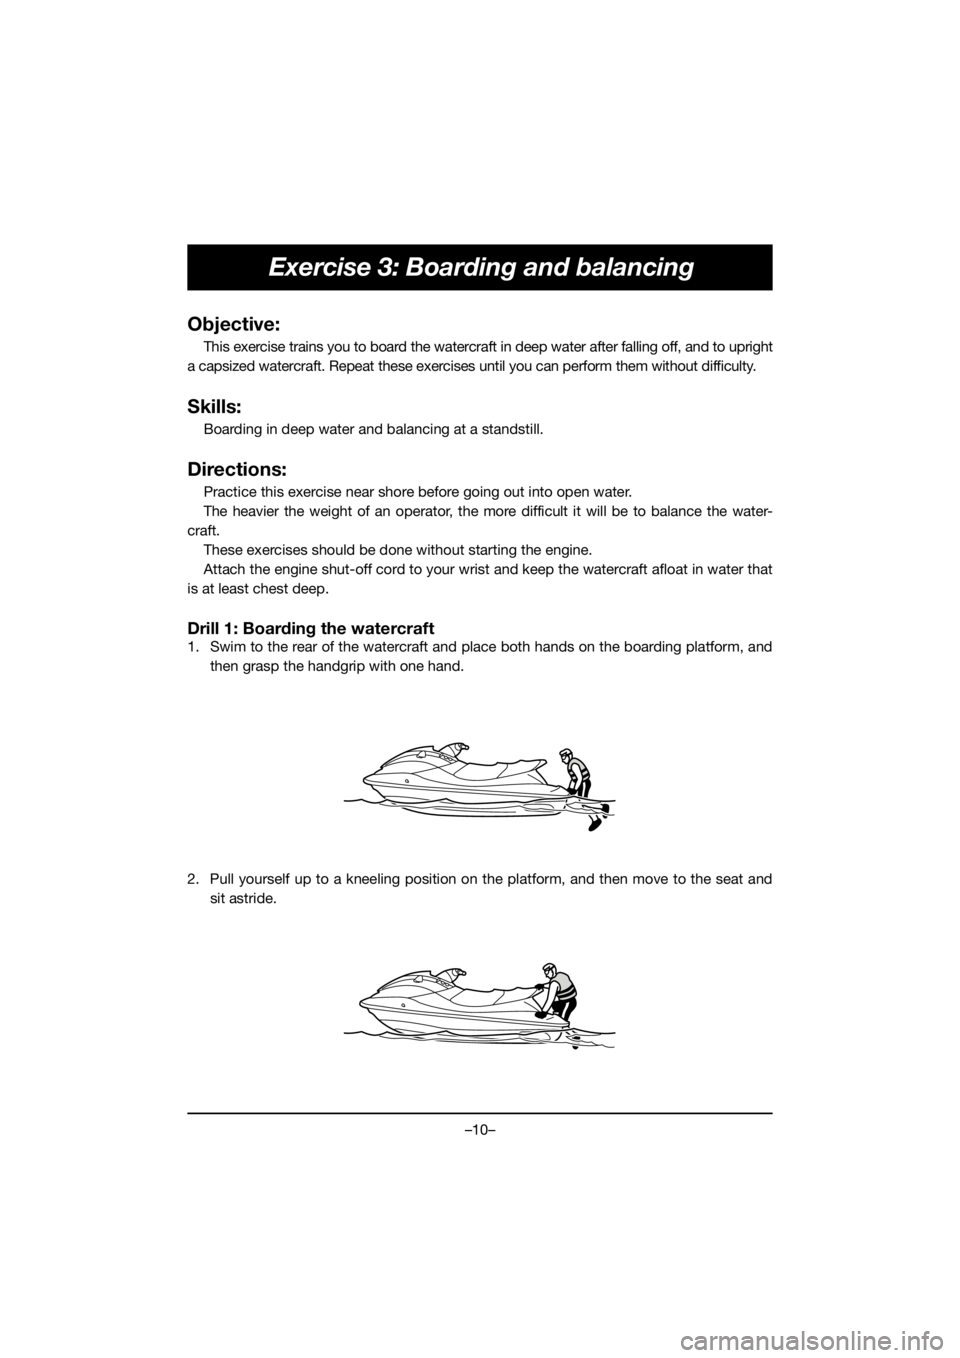 YAMAHA EX 2020 User Guide –10–
Exercise 3: Boarding and balancing
Objective:
This exercise trains you to board the watercraft in deep water after falling off, and to upright
a capsized watercraft. Repeat these exercises un